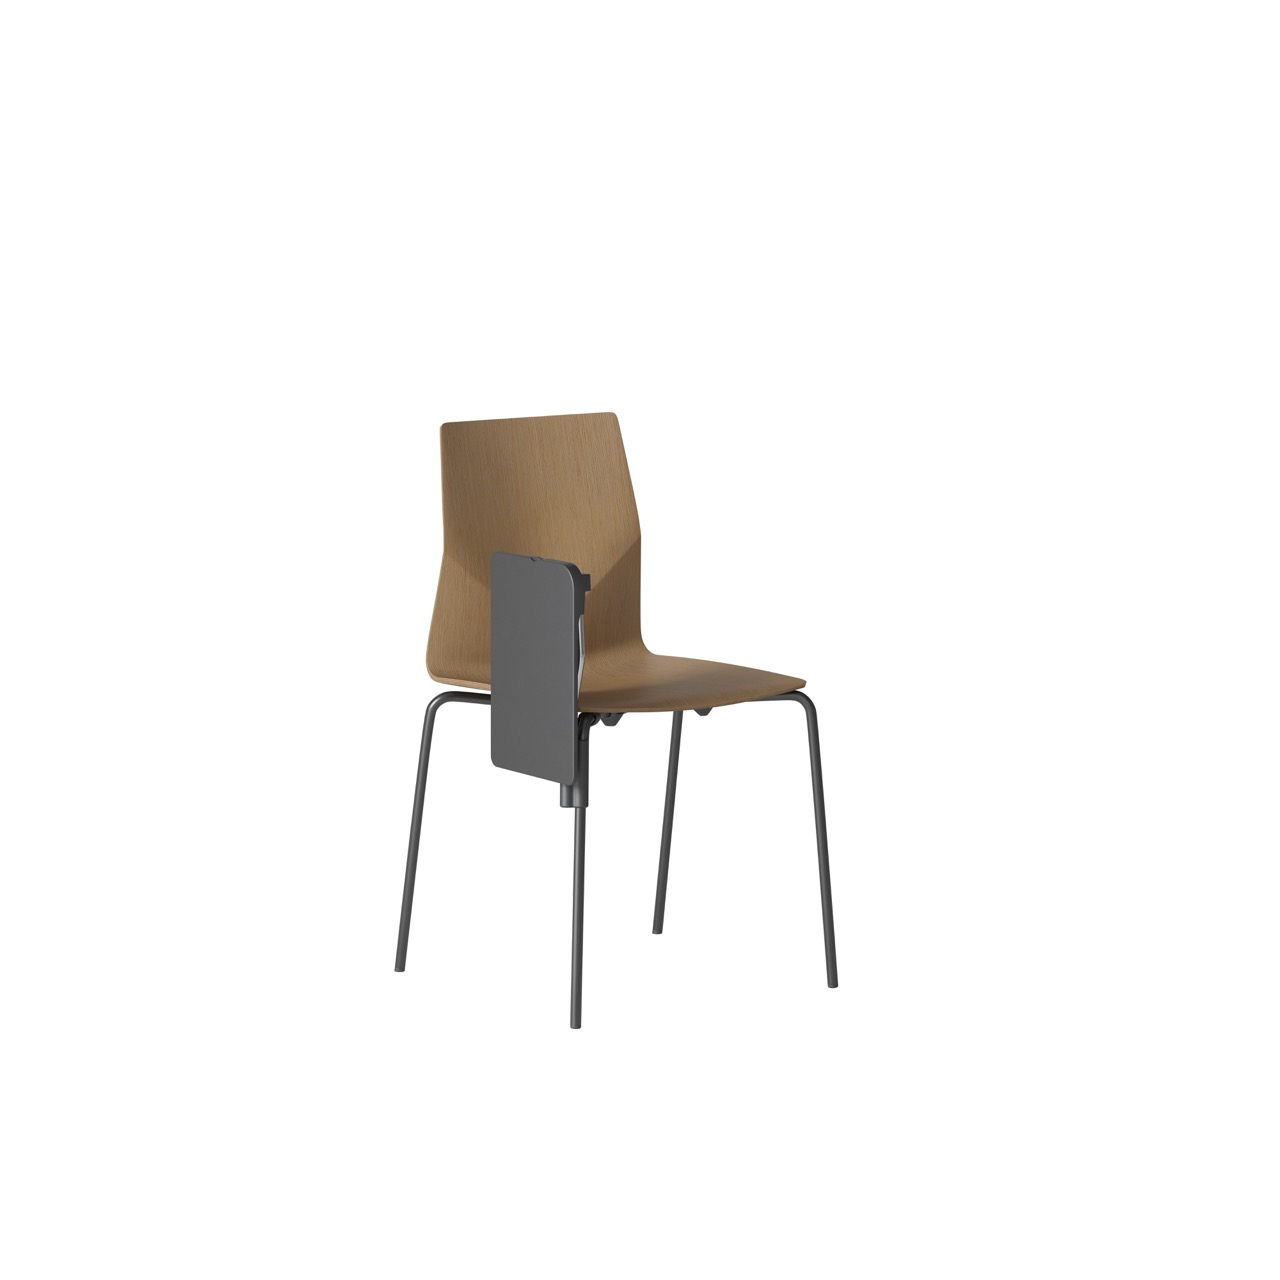 OCEE&FOUR – Chairs – FourCast 2 Four – Veneer shell - Inno Note - Nested - Packshot Image 6 Large